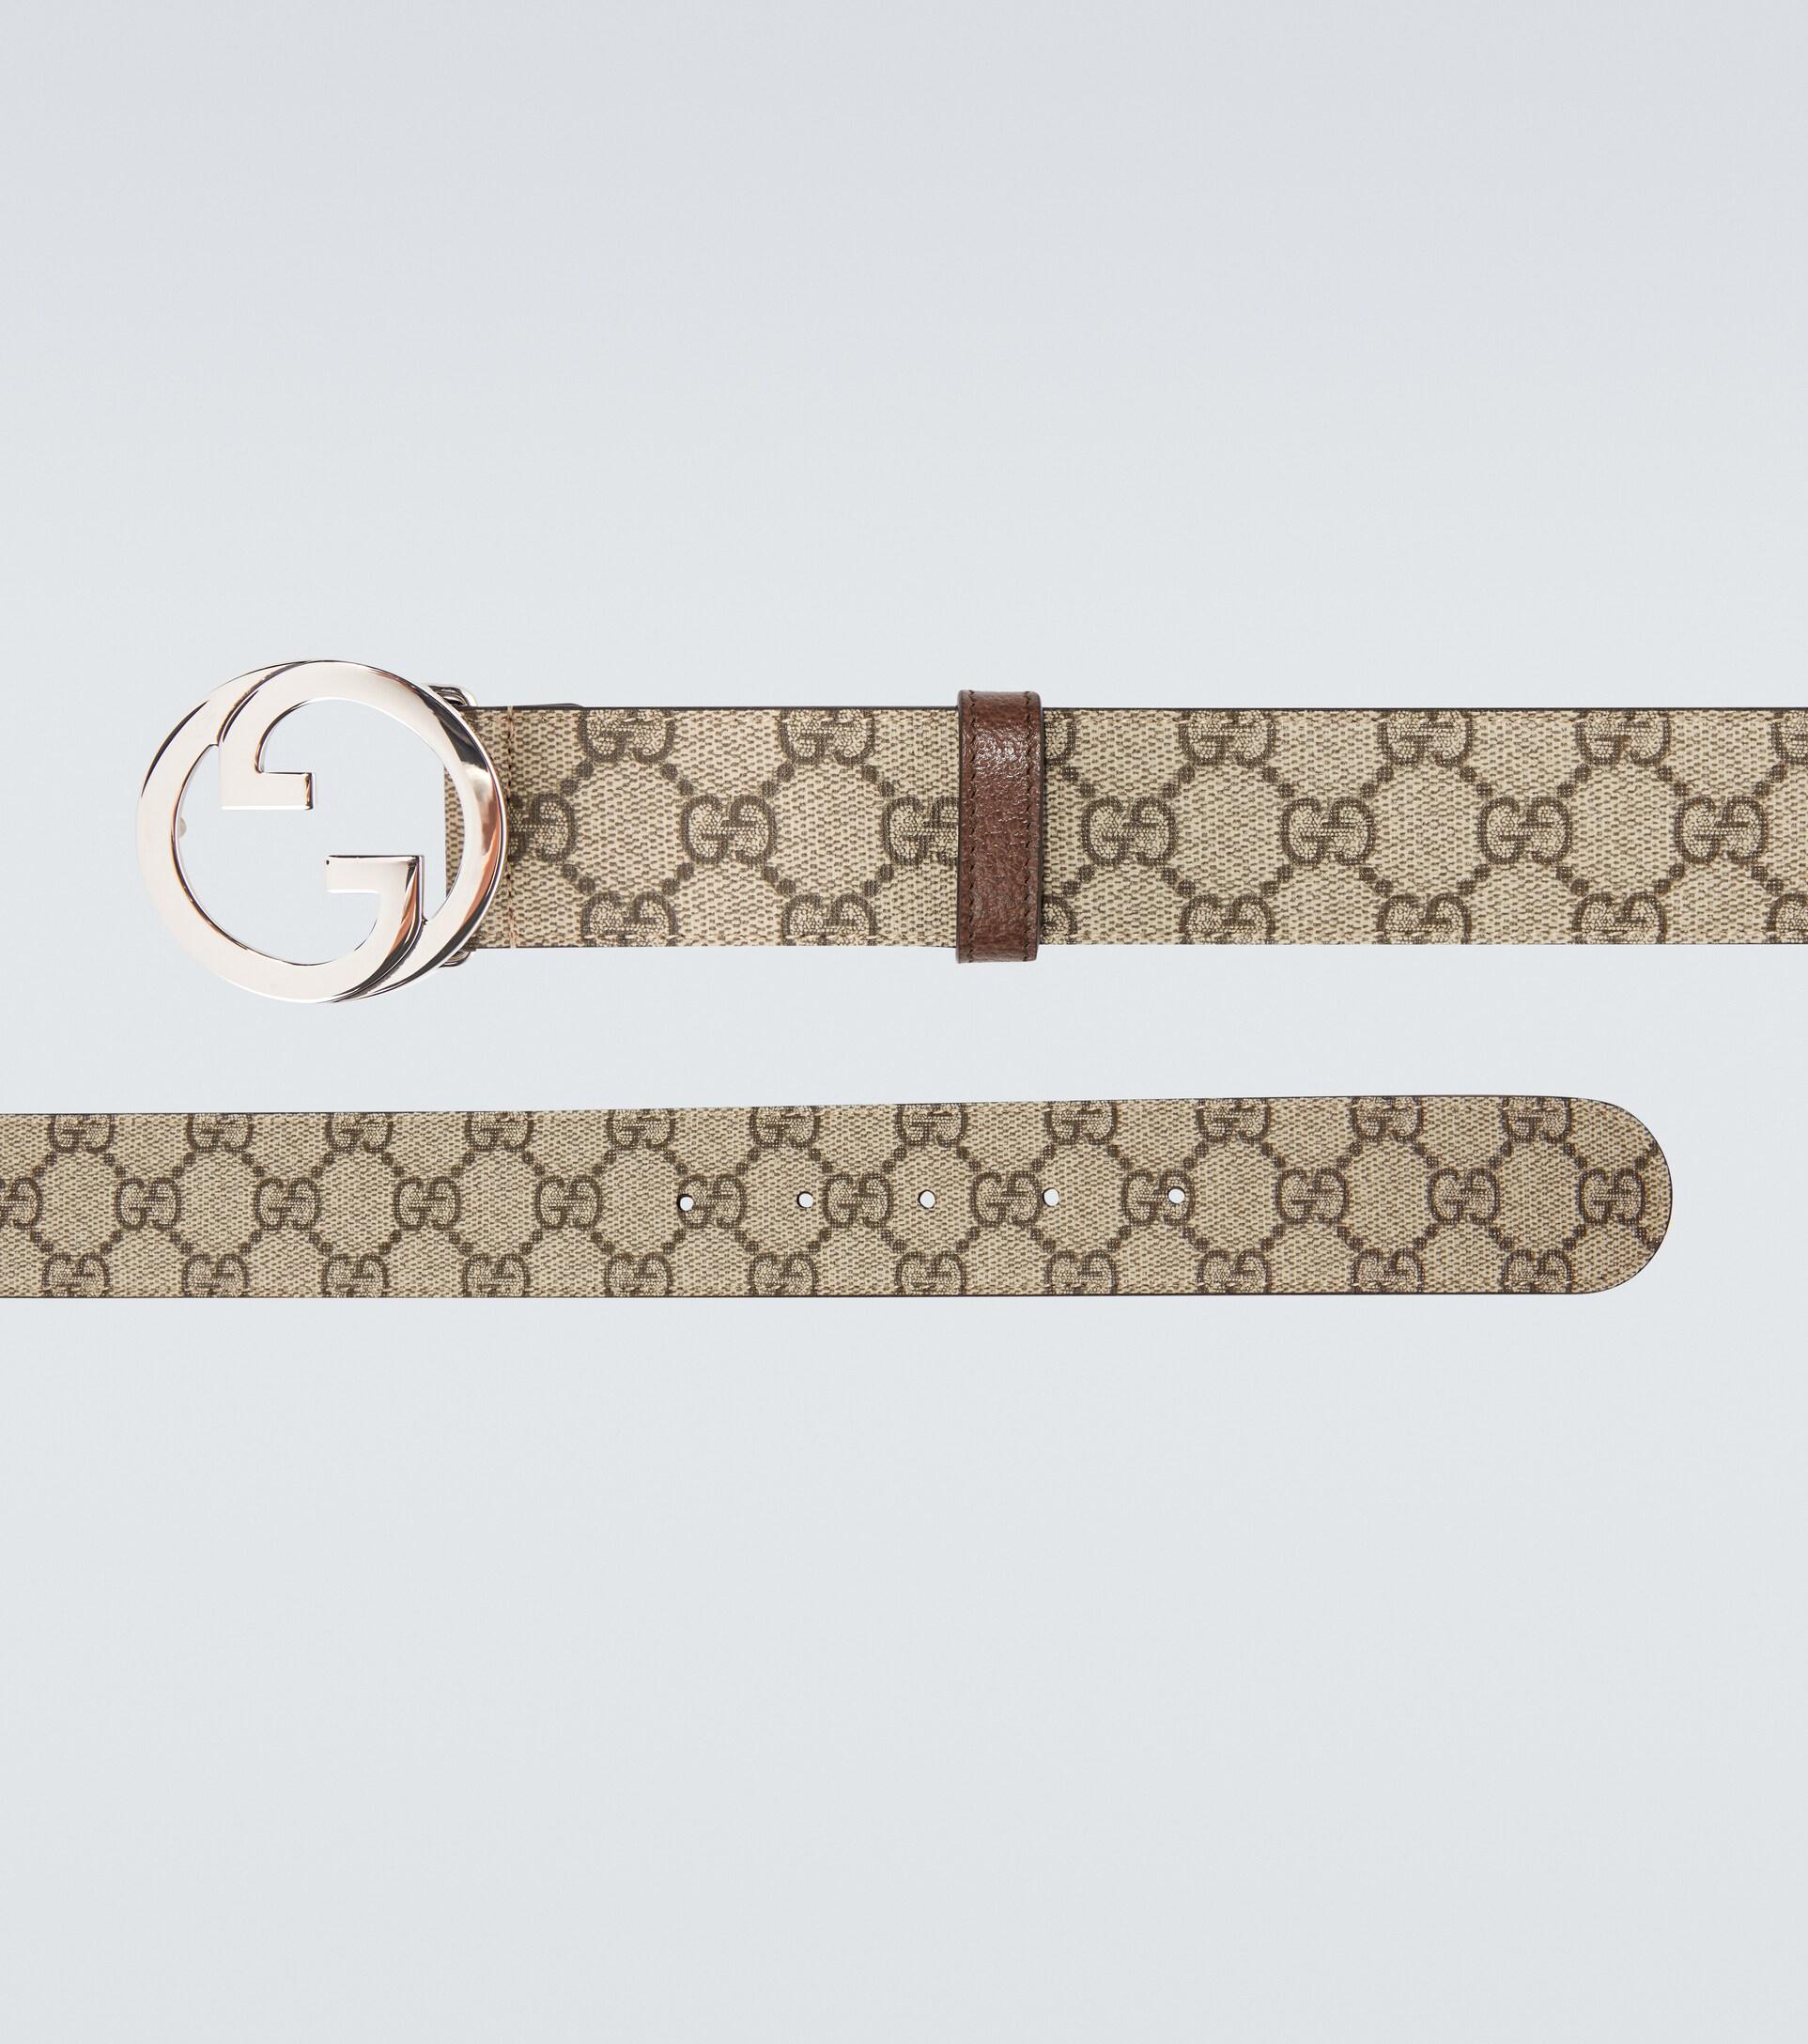 Gucci Reversible GG Supreme Leather Belt in Metallic for Men | Lyst